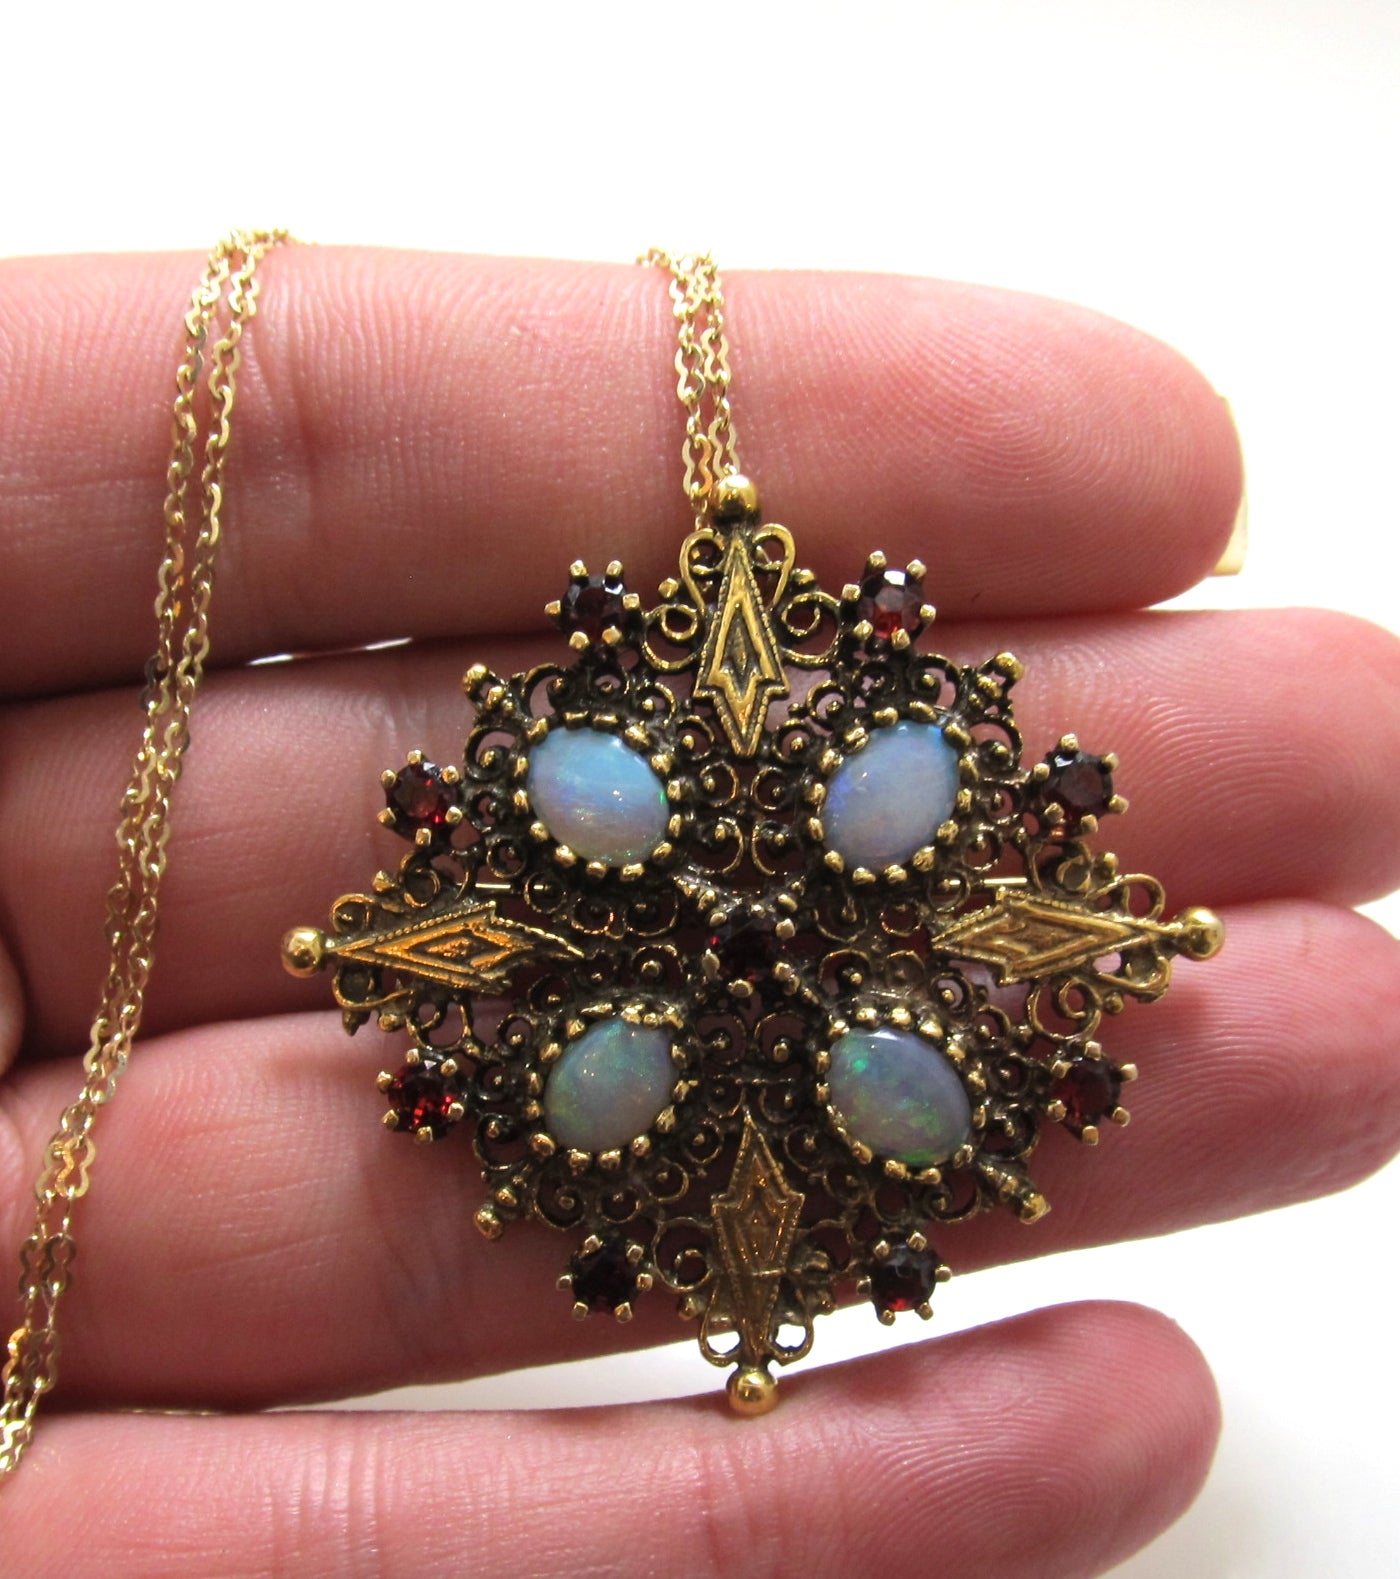 Vintage gold necklace with opals and garnets